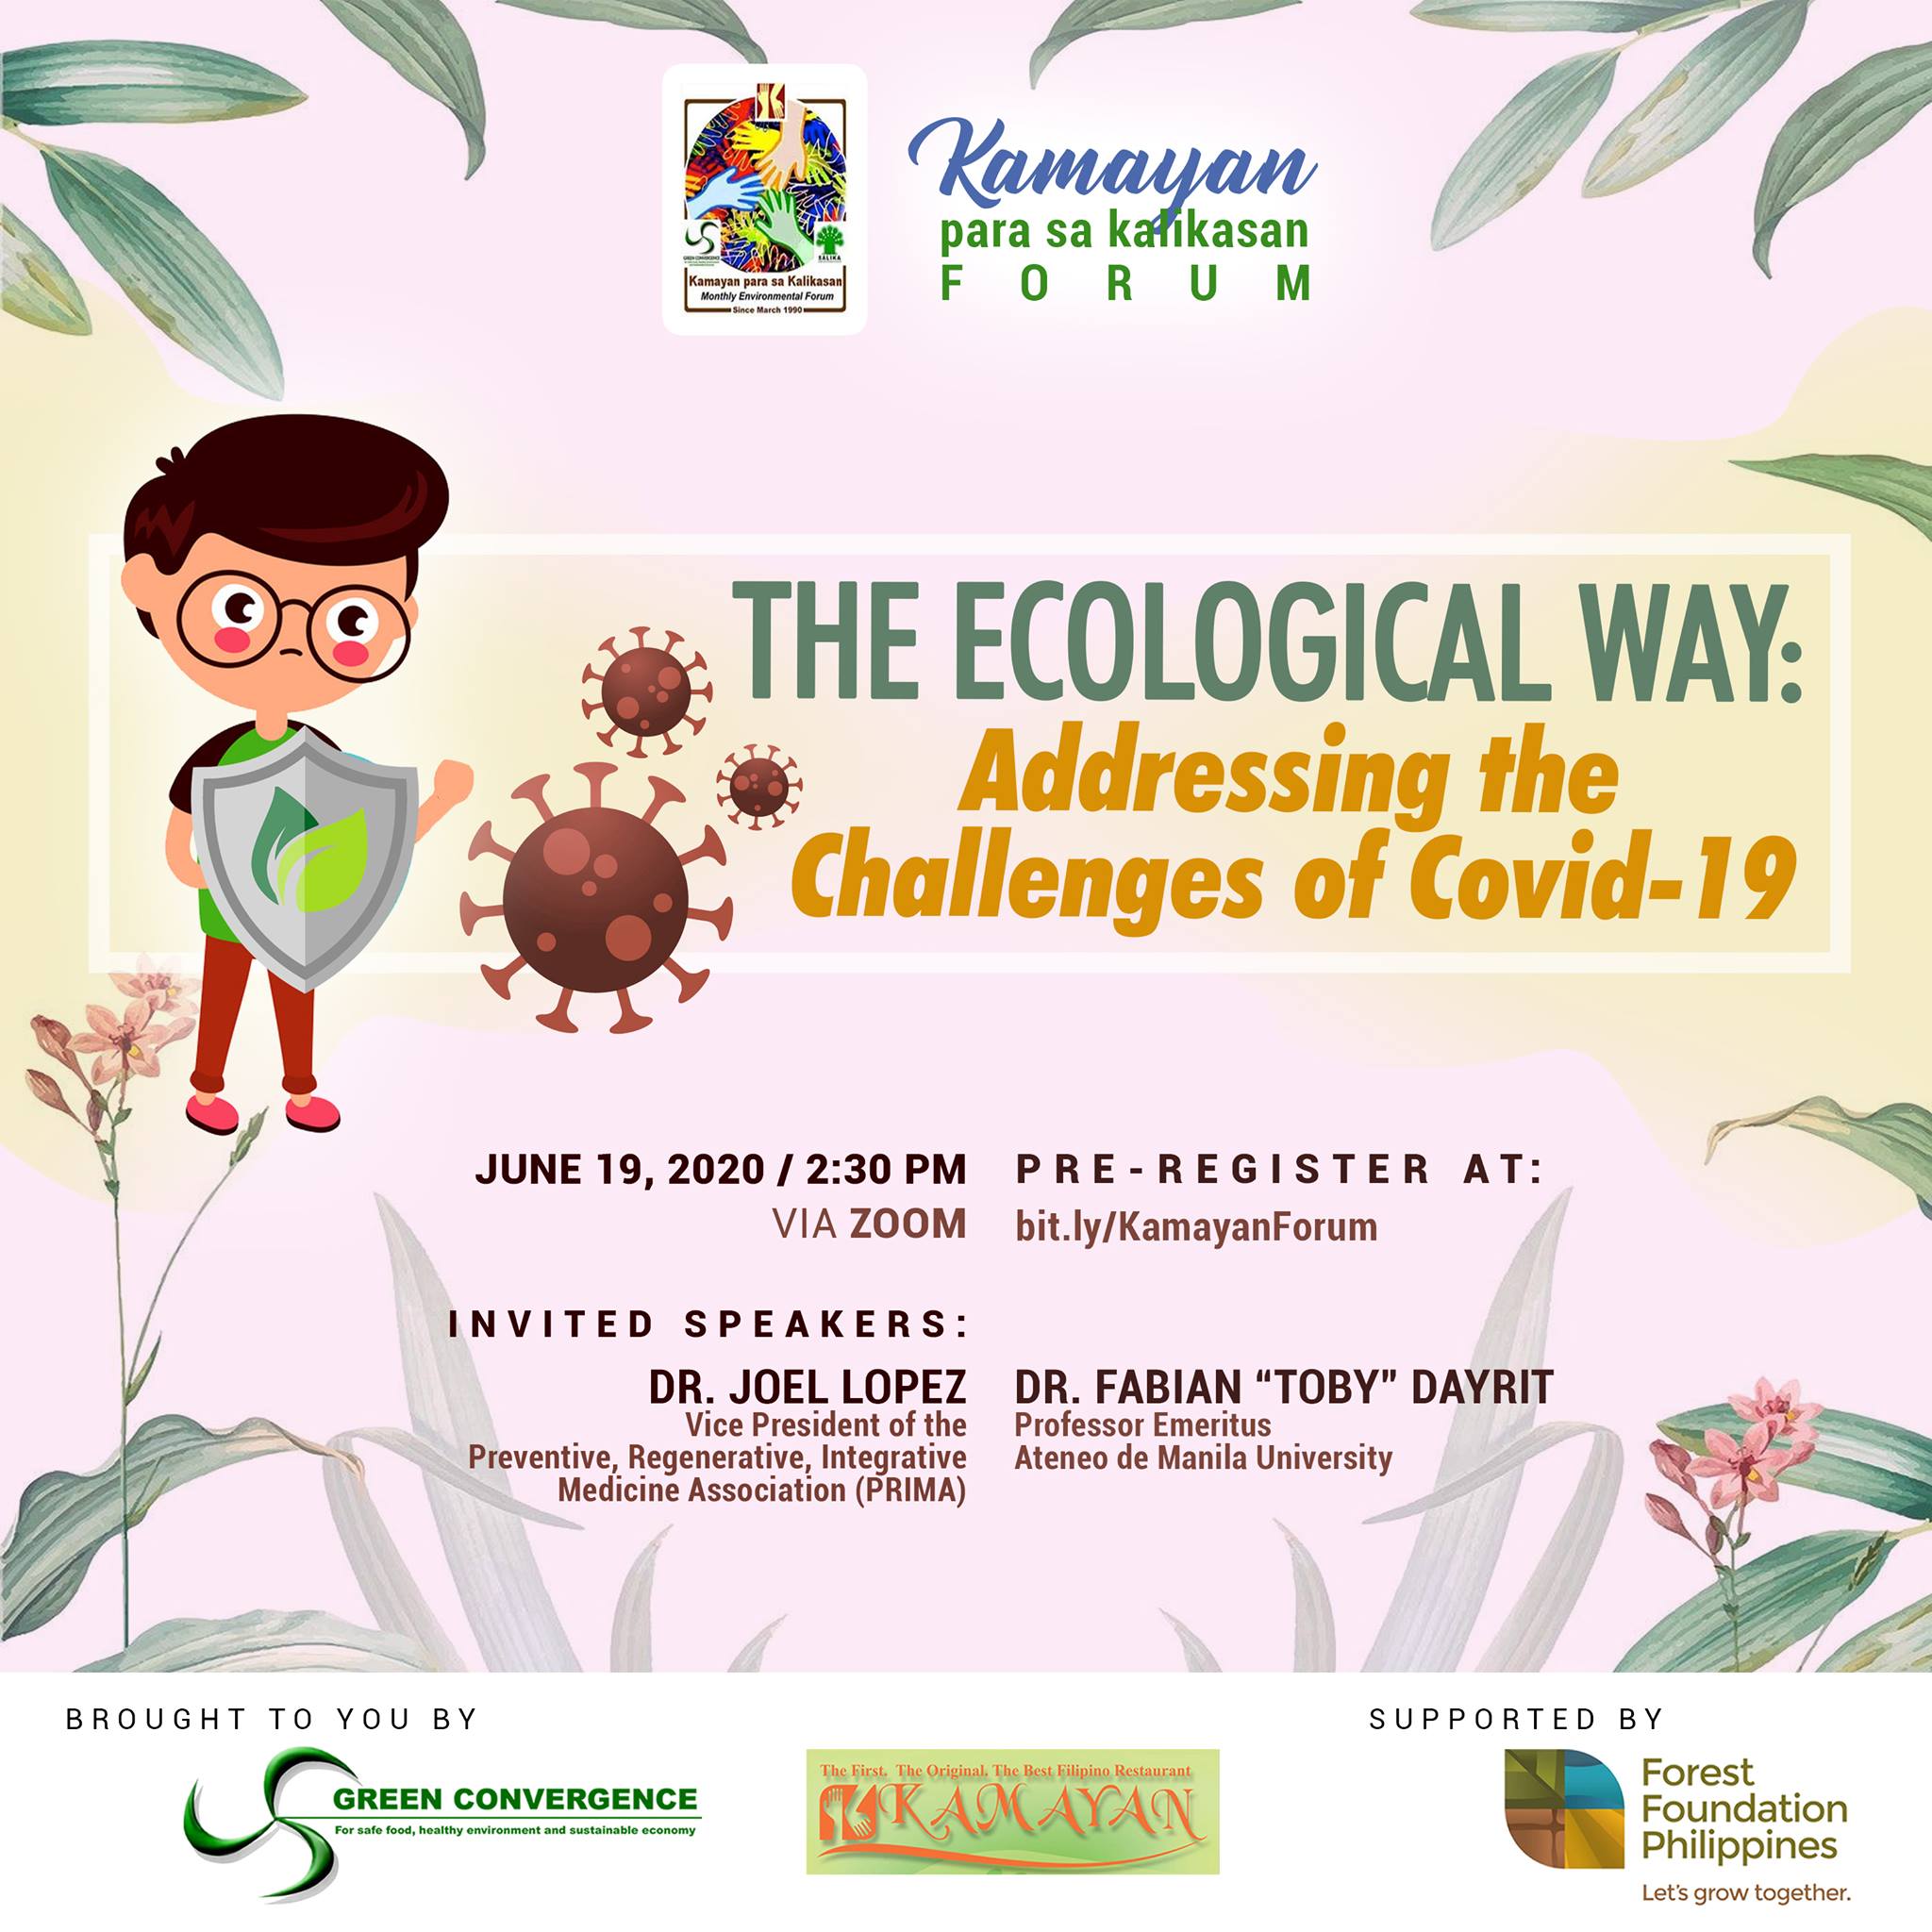 The Ecological Way: Addressing the Challenges of Covid-19